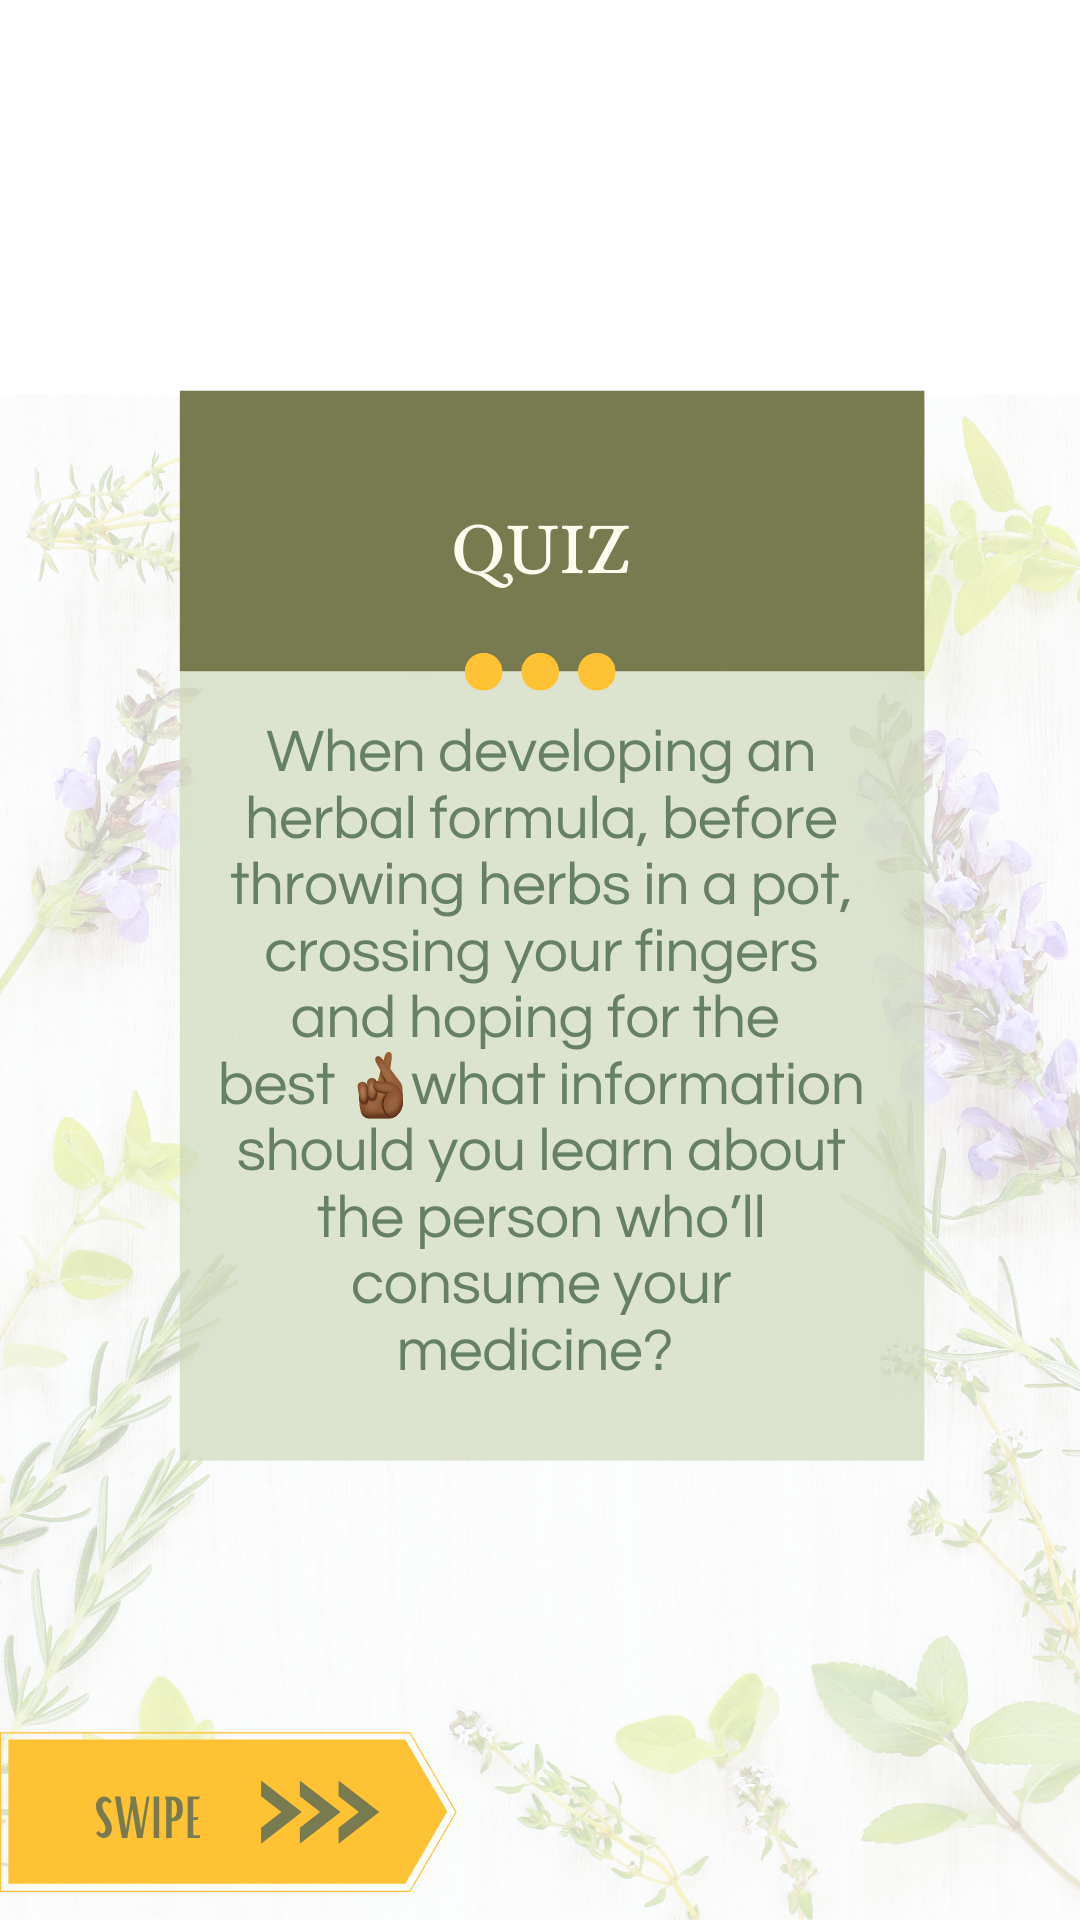 Test Your Knowledge with this Herbal Quiz